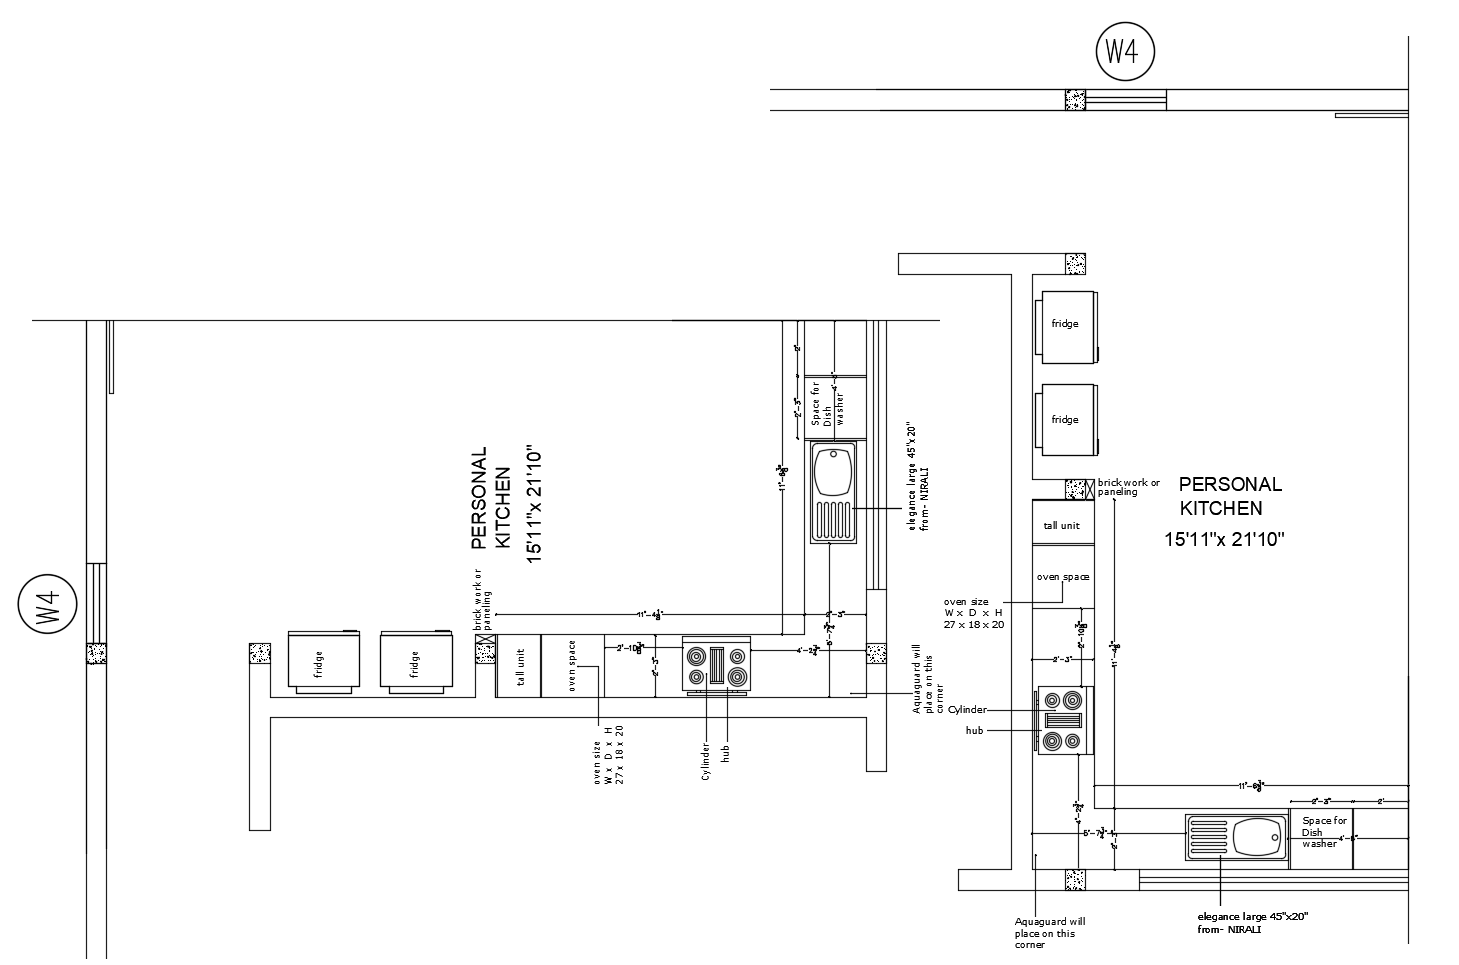  Dwg  file  of kitchen  layout Cadbull